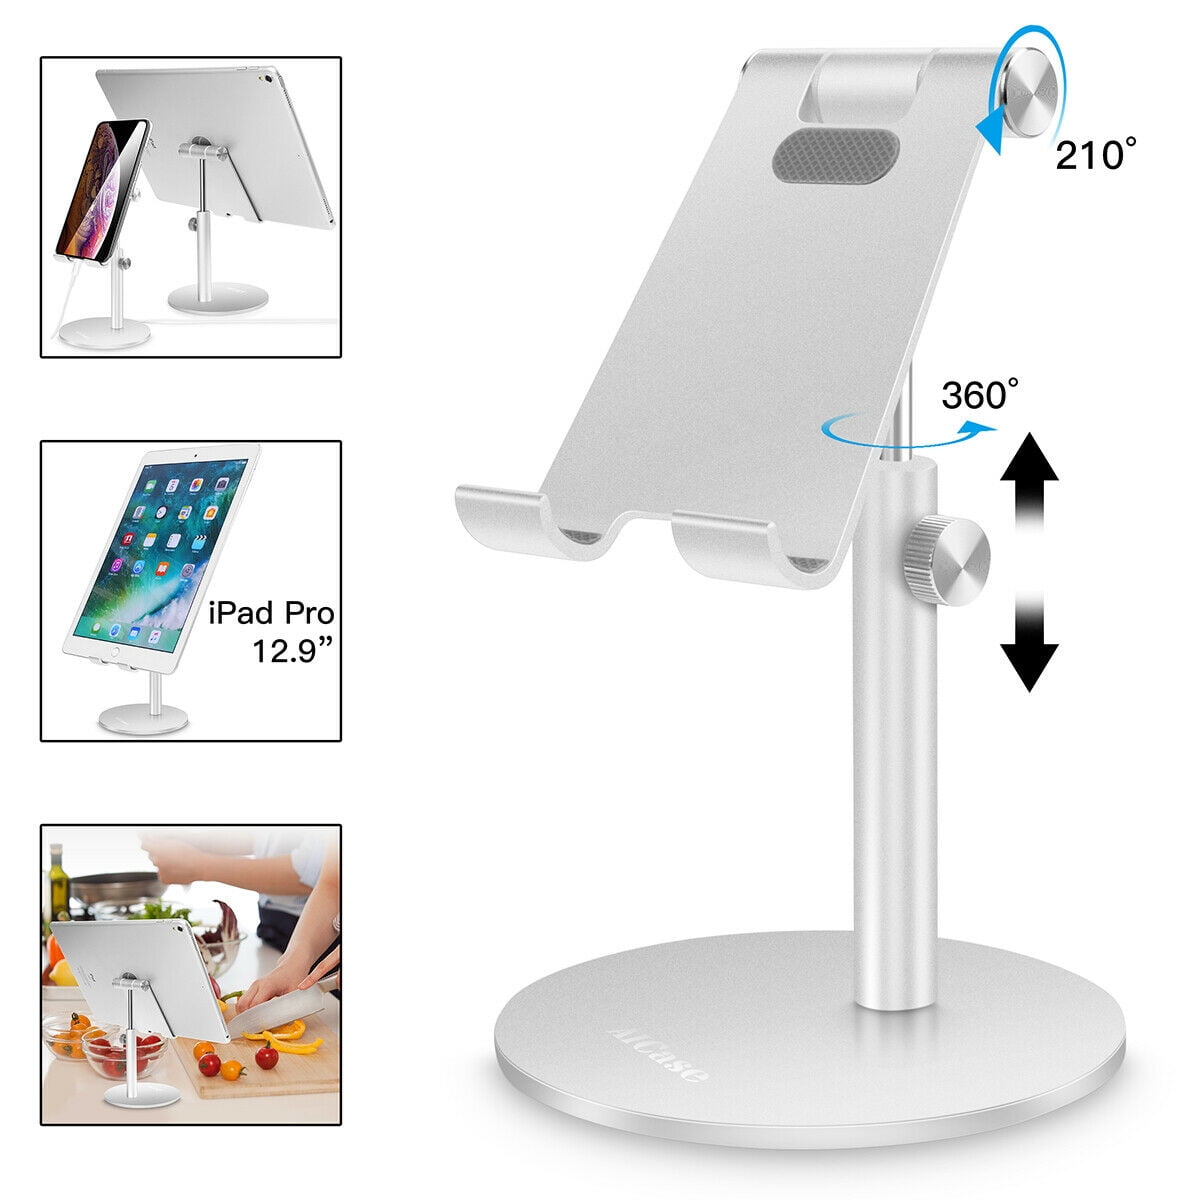 7Plus Samsung Galaxy S7/ S8 Google Nexus Lumia Tablet iPad NOPNOG Cell Phone Stand for Desk Lightweight Multi-Angle Adjustable Mount Holder for iPhone X,8,8Plus,7